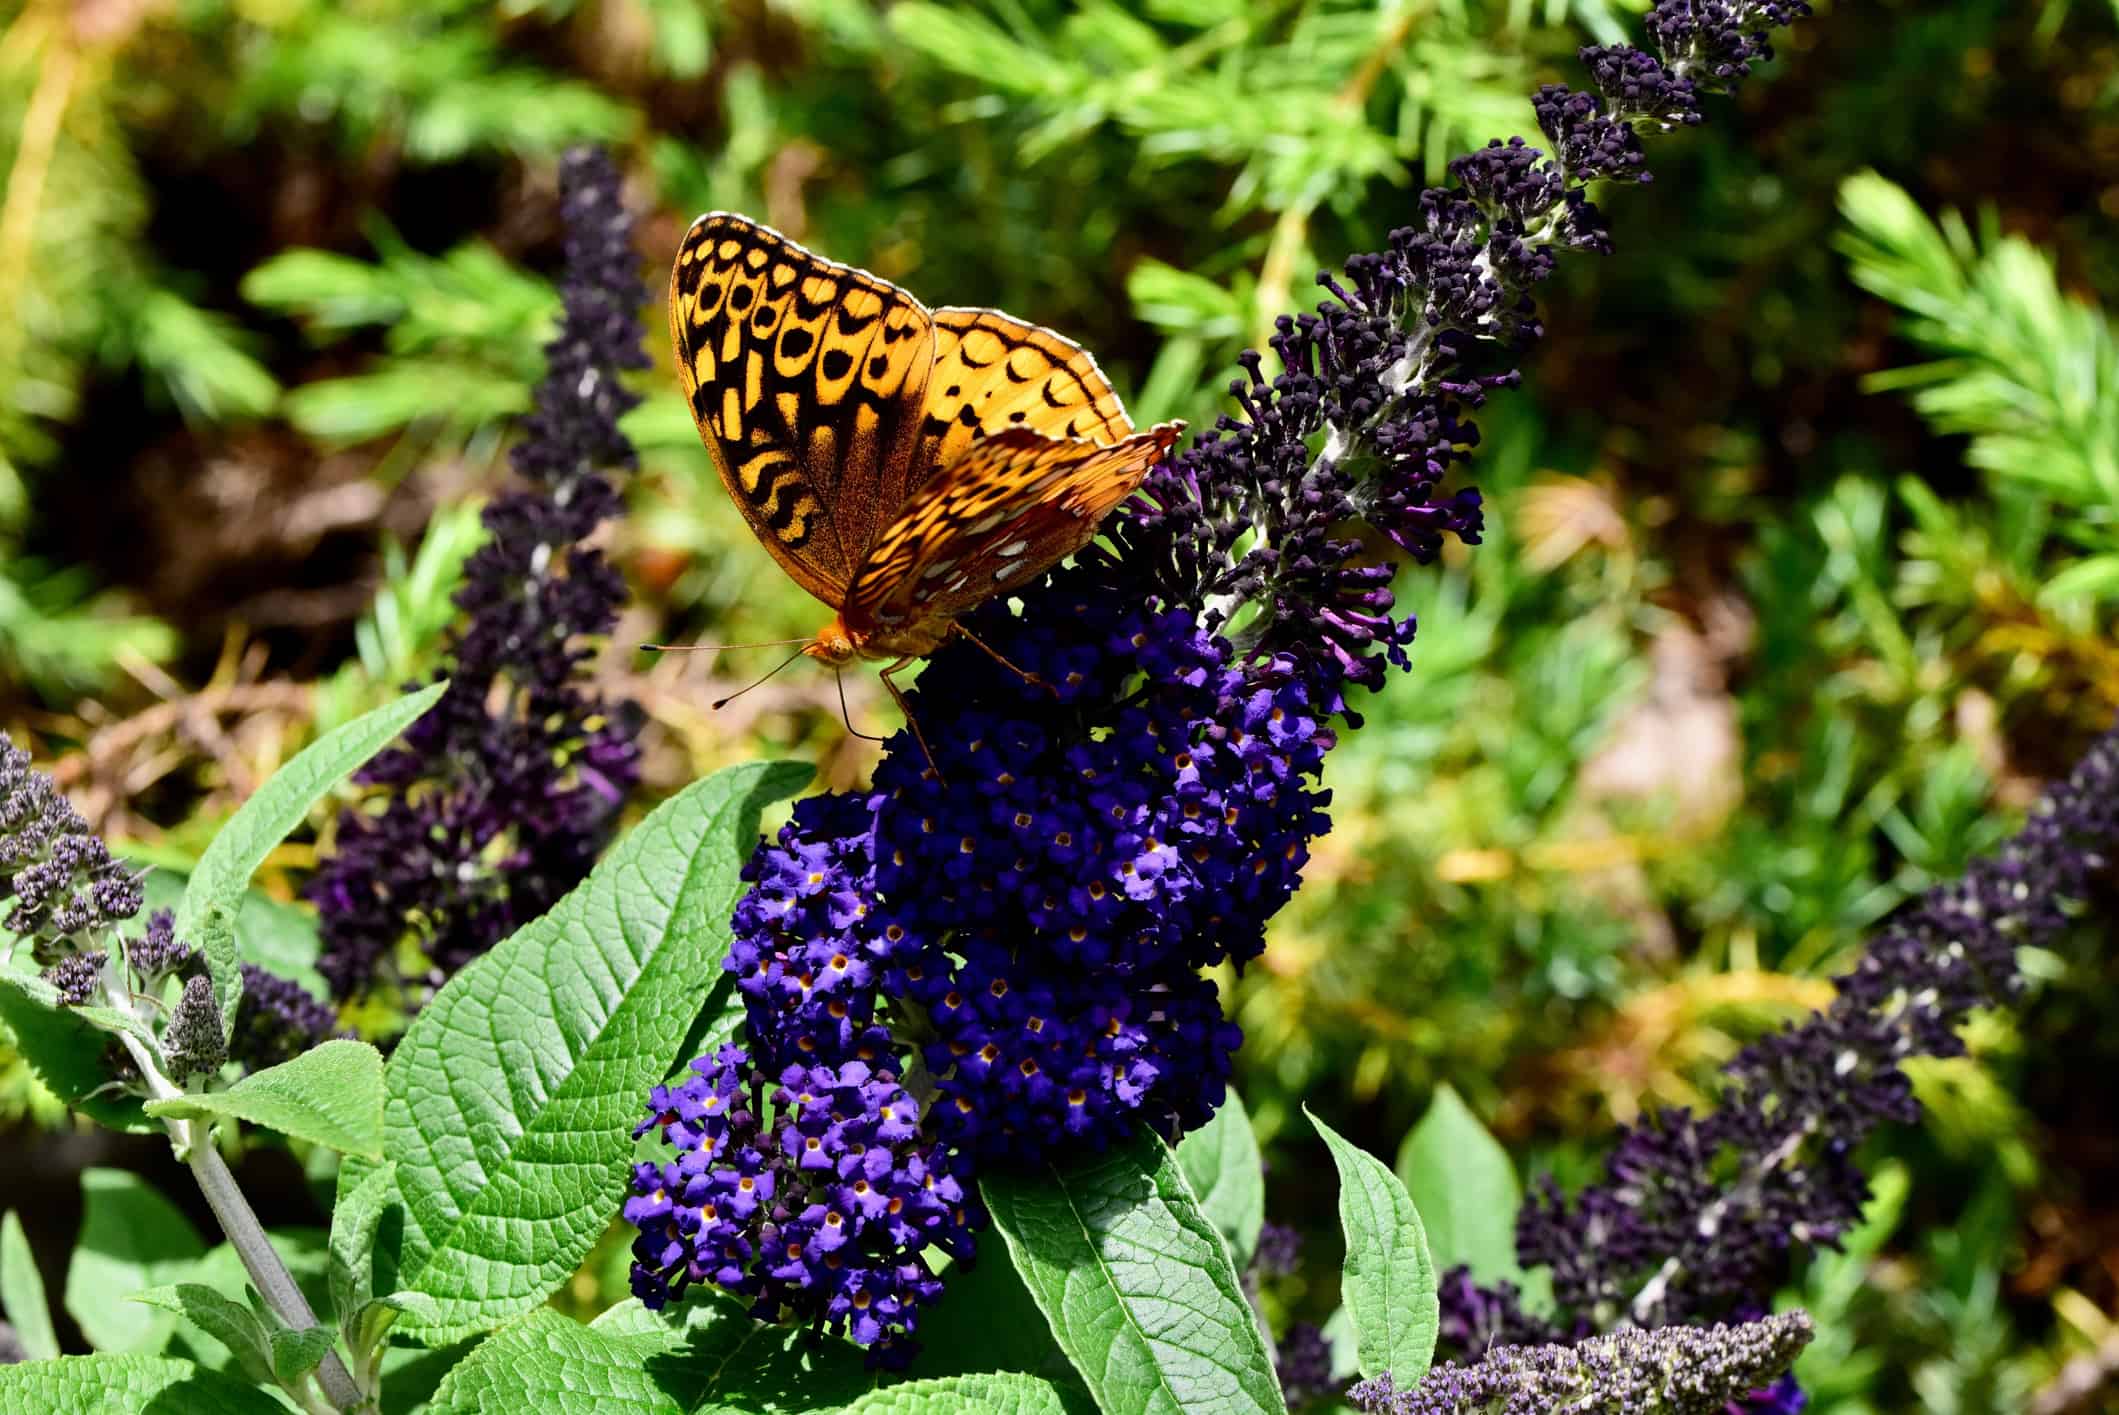 Closeup shot of a great spangled fritillary butterfly on the buddleia pugster blue flower.